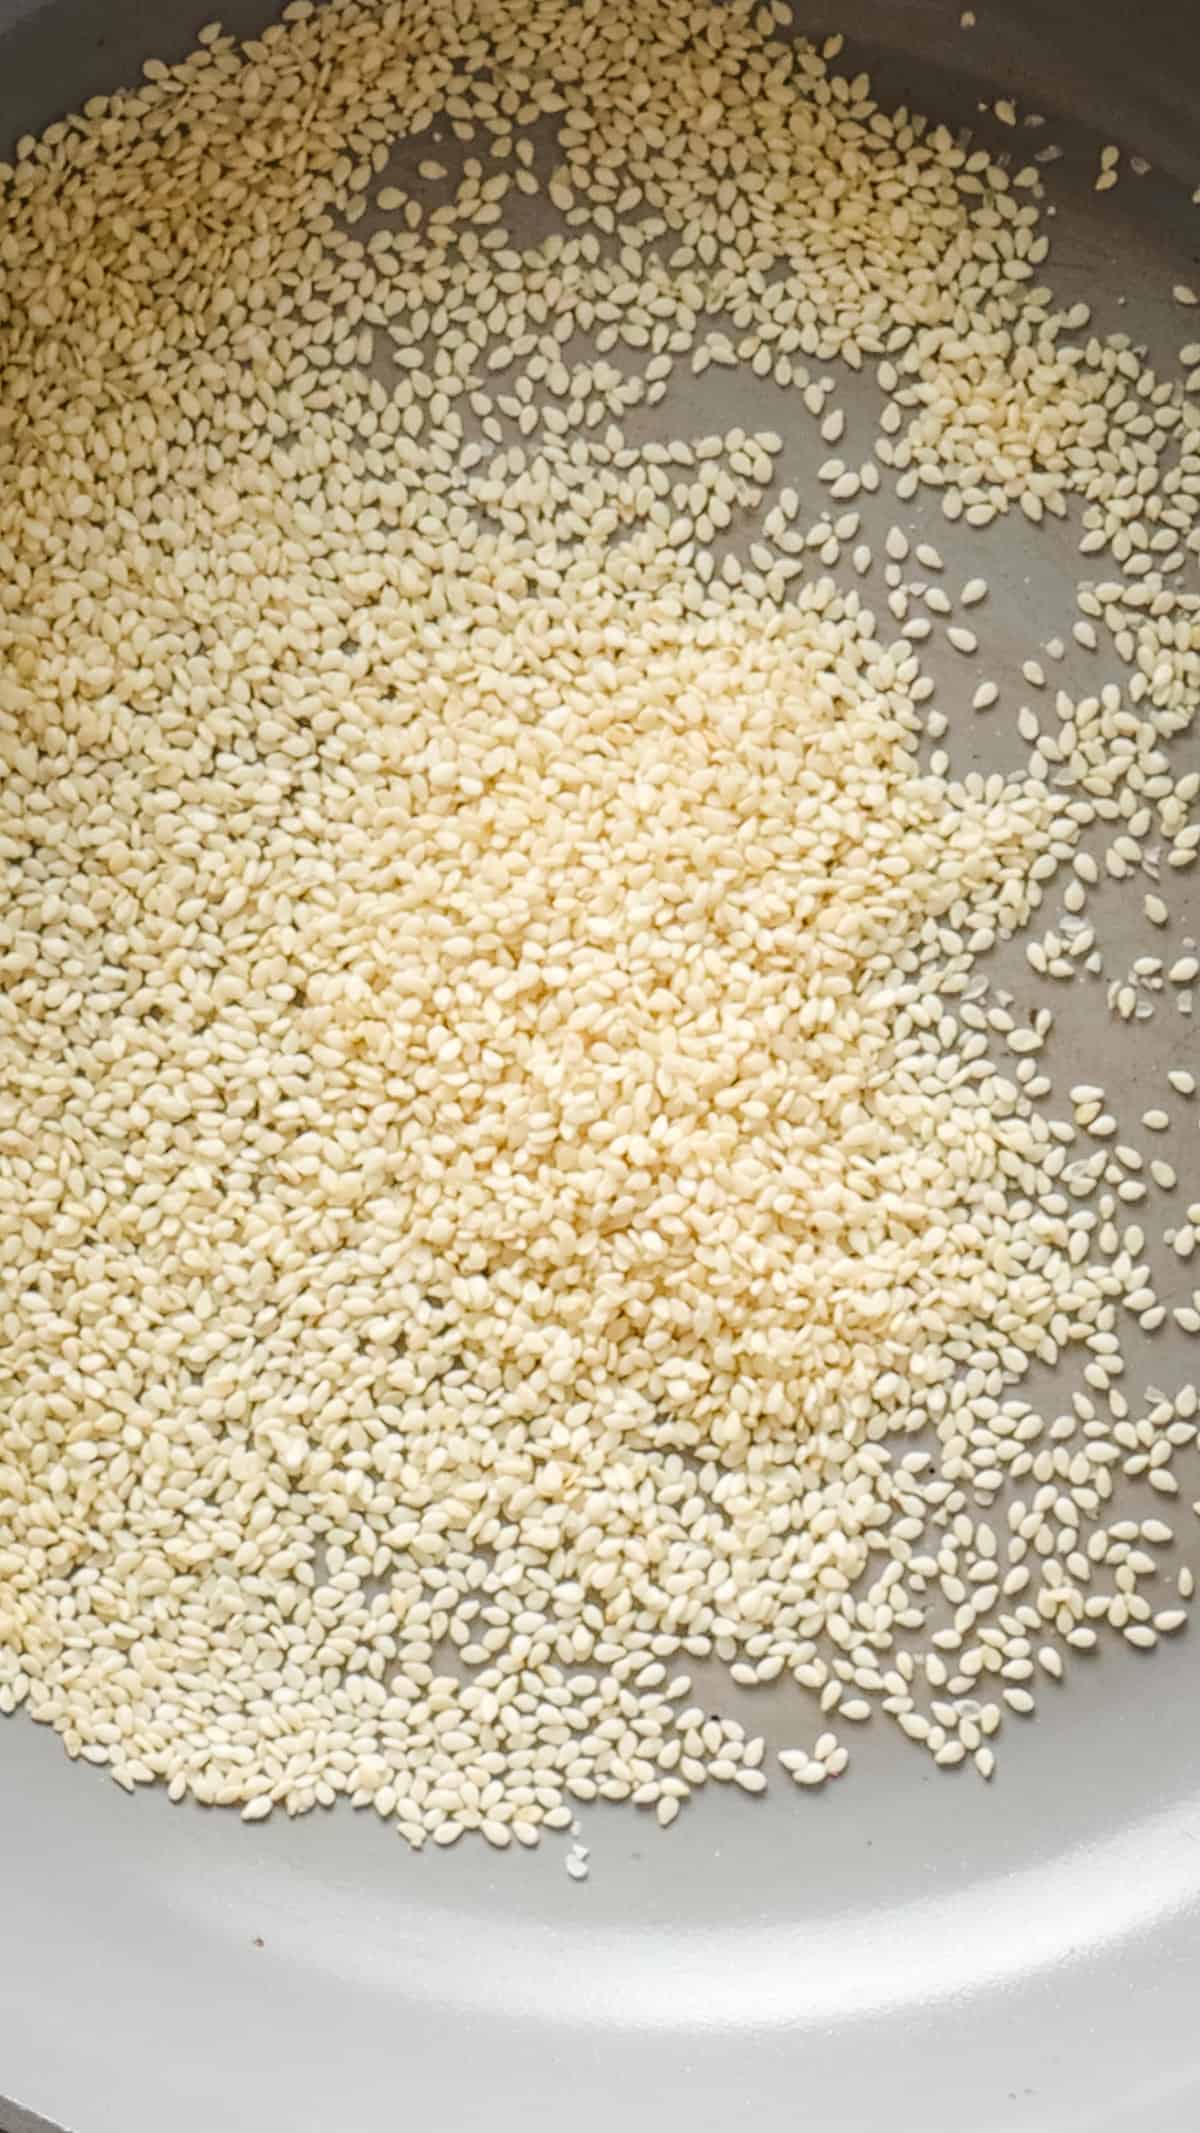 An image of sesame seeds in a large bowl before being toasted.